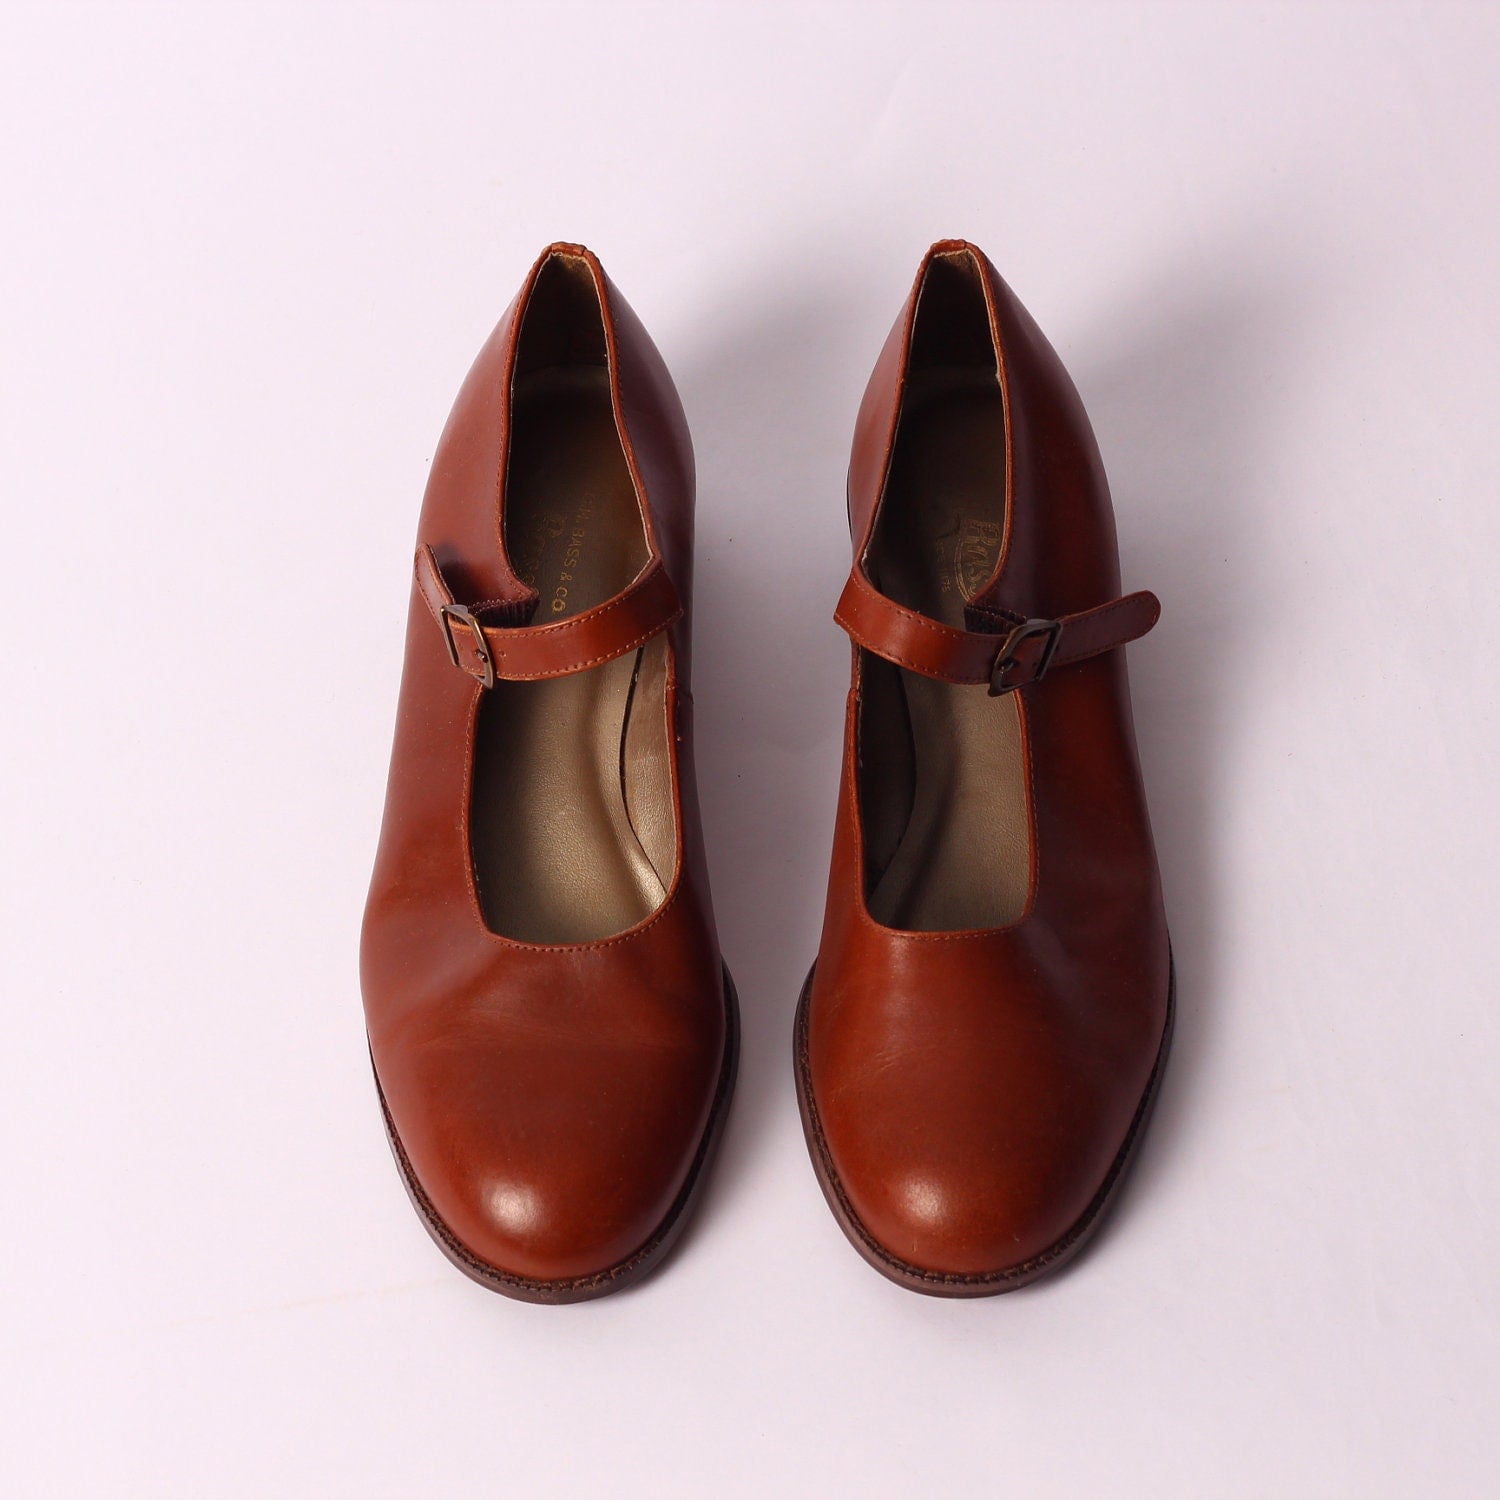  Vintage  BASS Mary  Jane  Flats brown leather shoes  Women  size